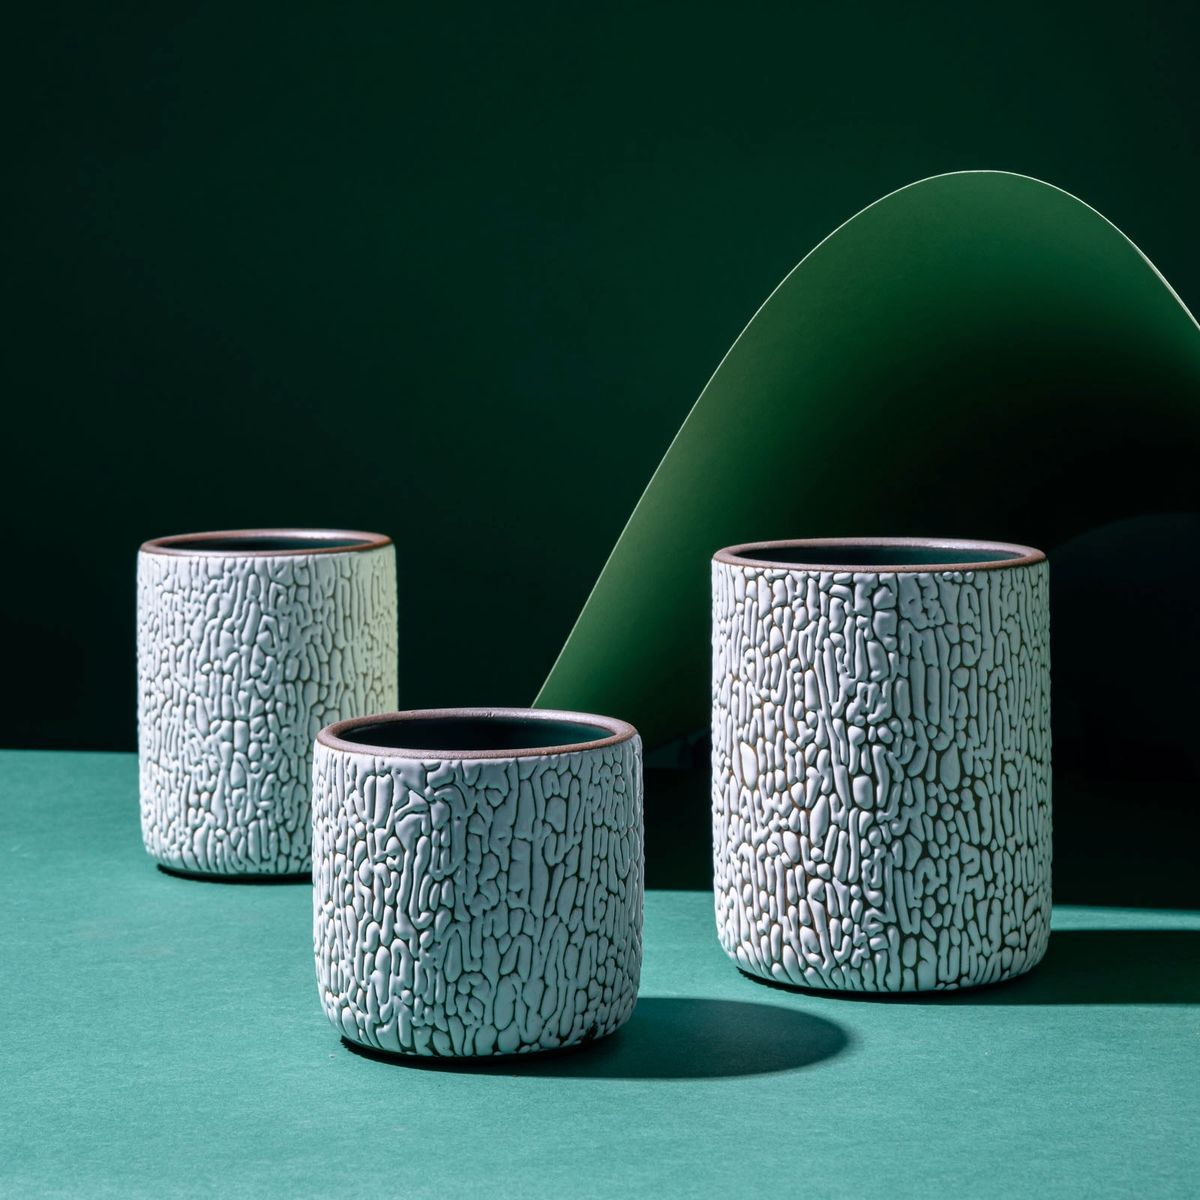 Three white ceramic vessels in Small, Medium, and Big with cracked texture and the interior being dark teal. Artfully arranged in a moody studio setting.